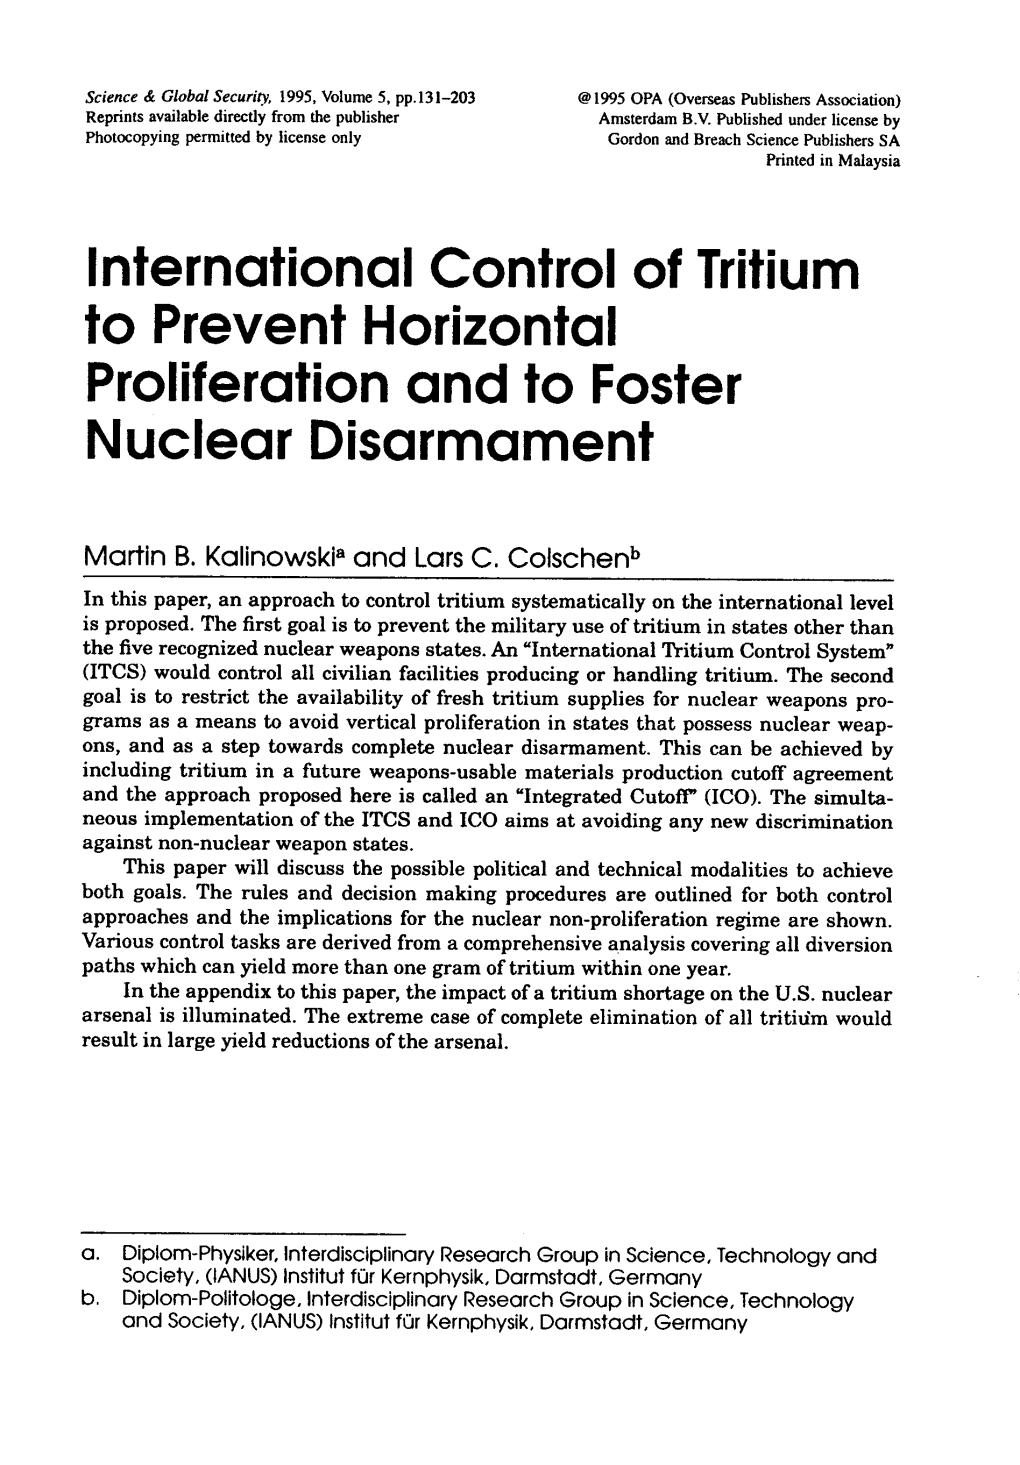 International Control of Tritium to Prevent Horizontal Proliferation and to Foster Nuclear Disarmament